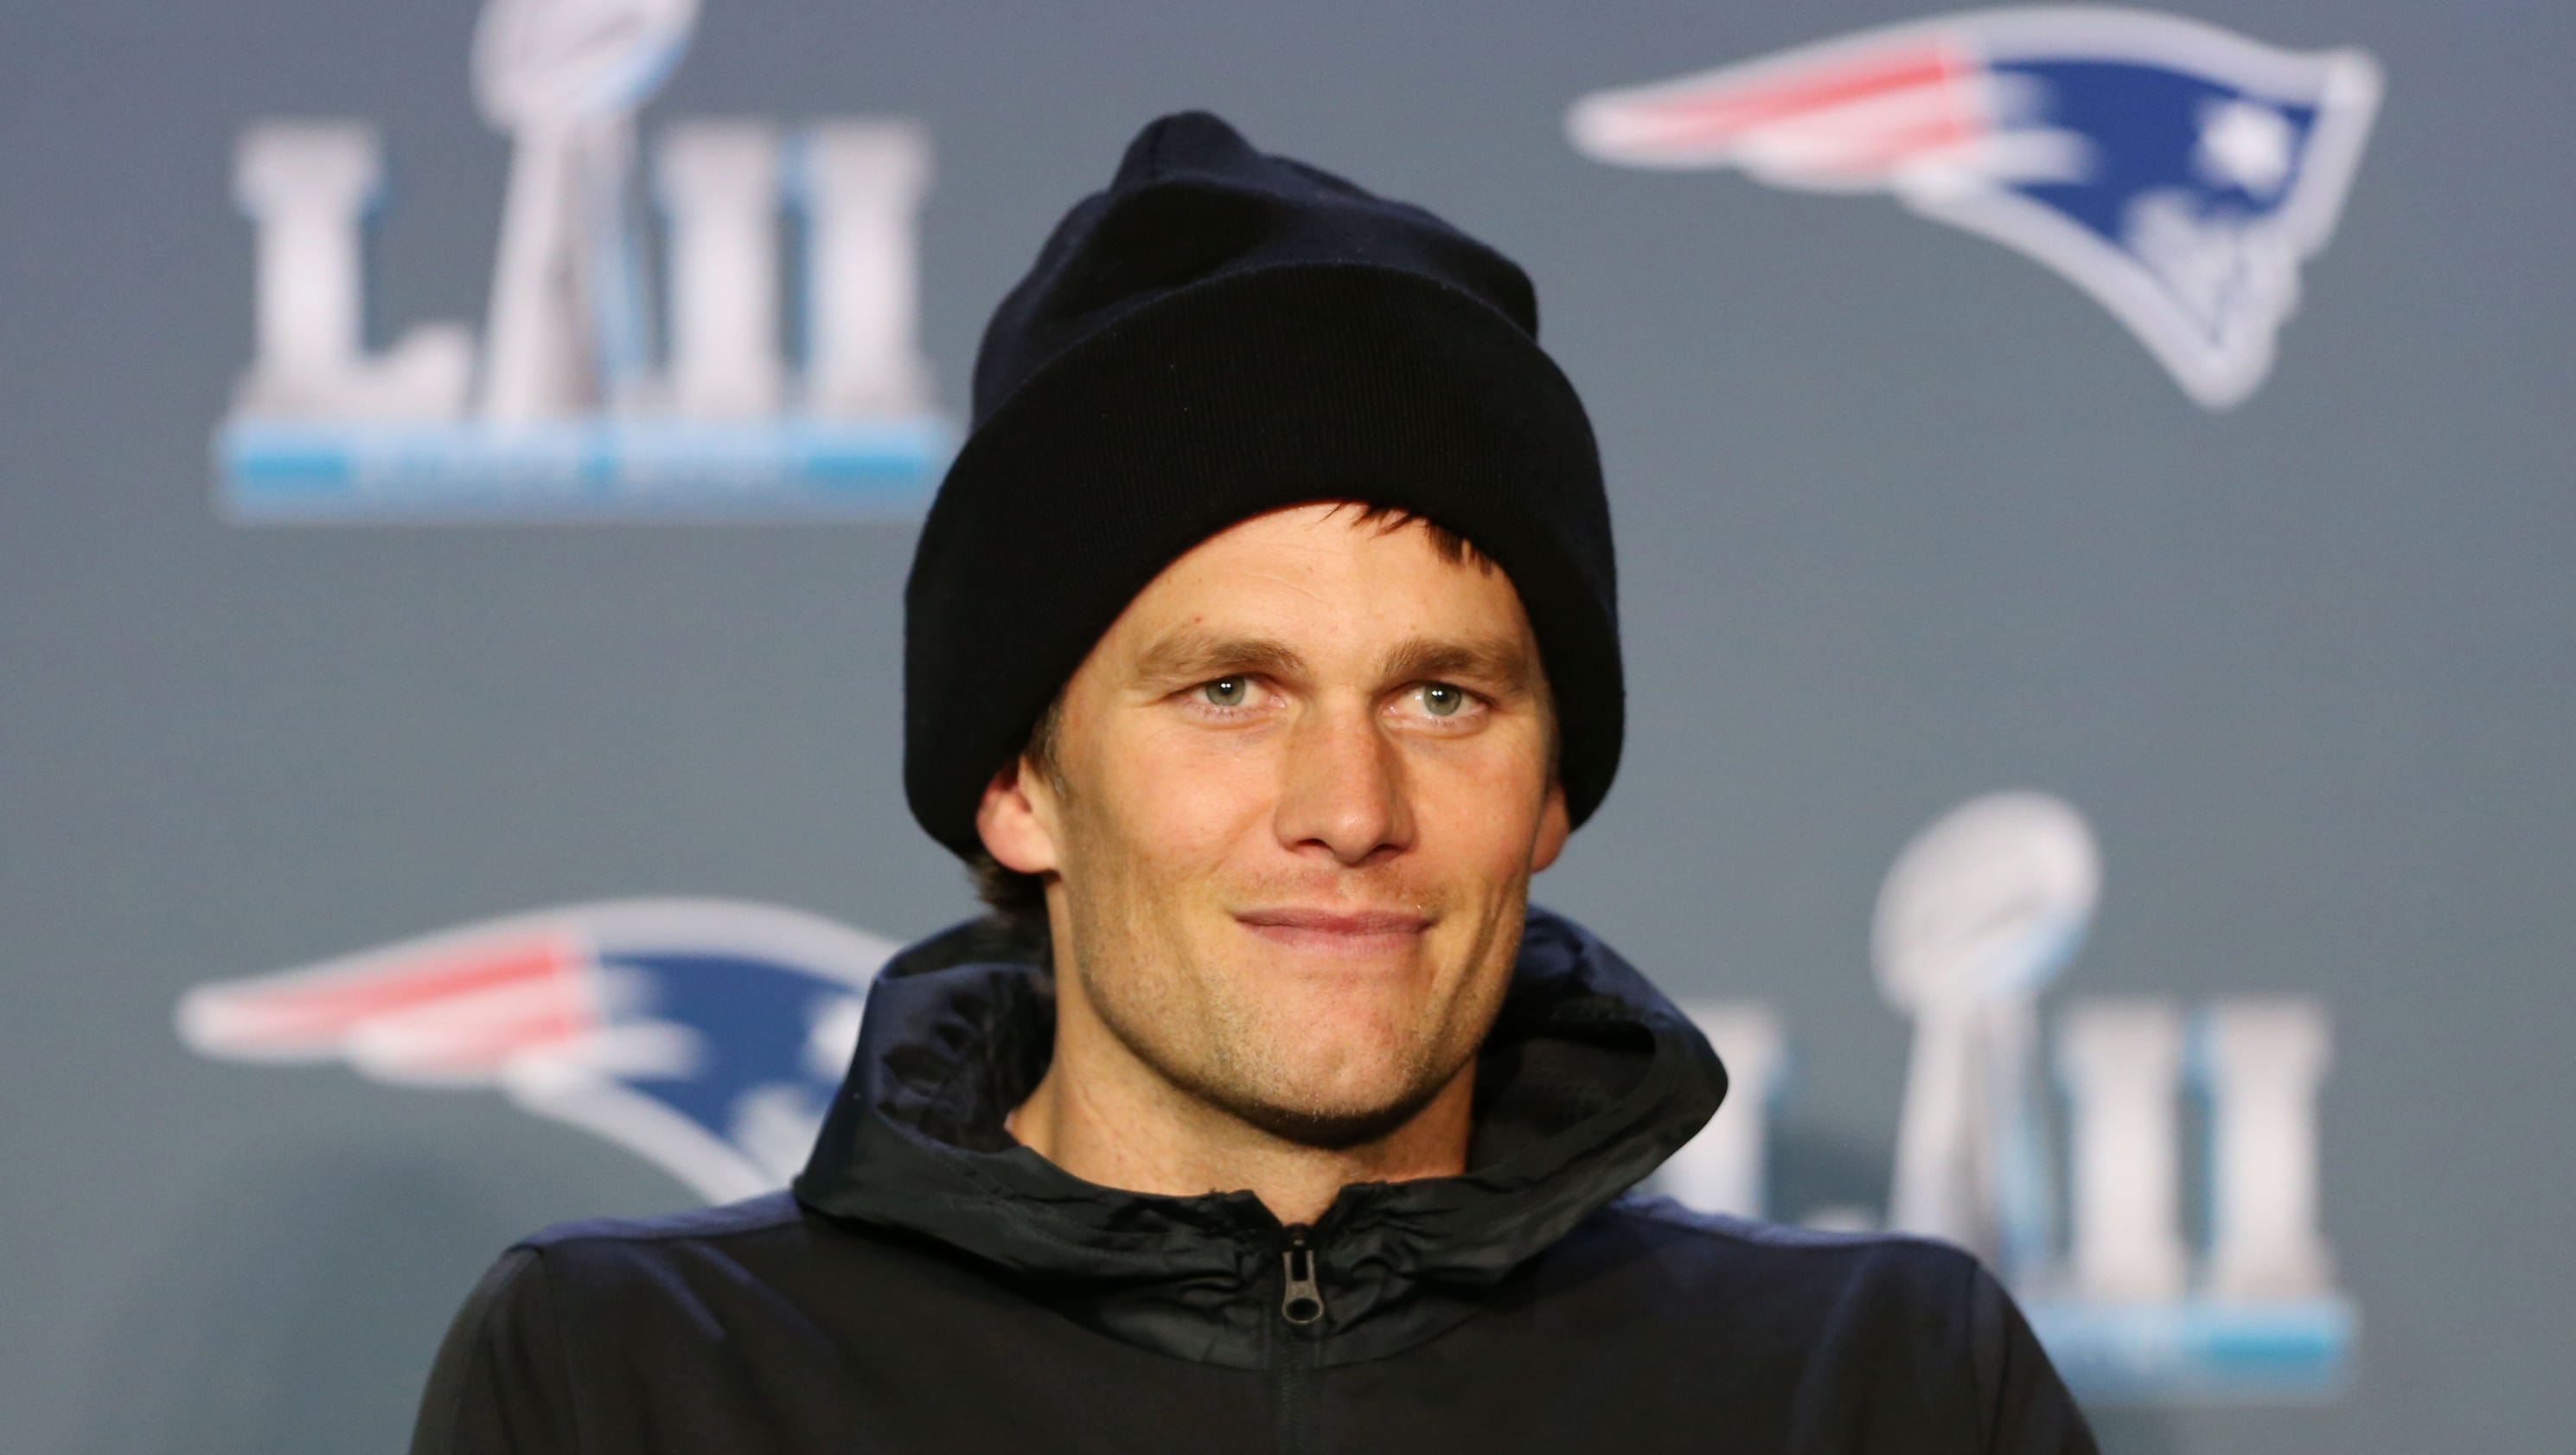 Tom Brady and fellow NFL players donate $700,000 to a federal PAC